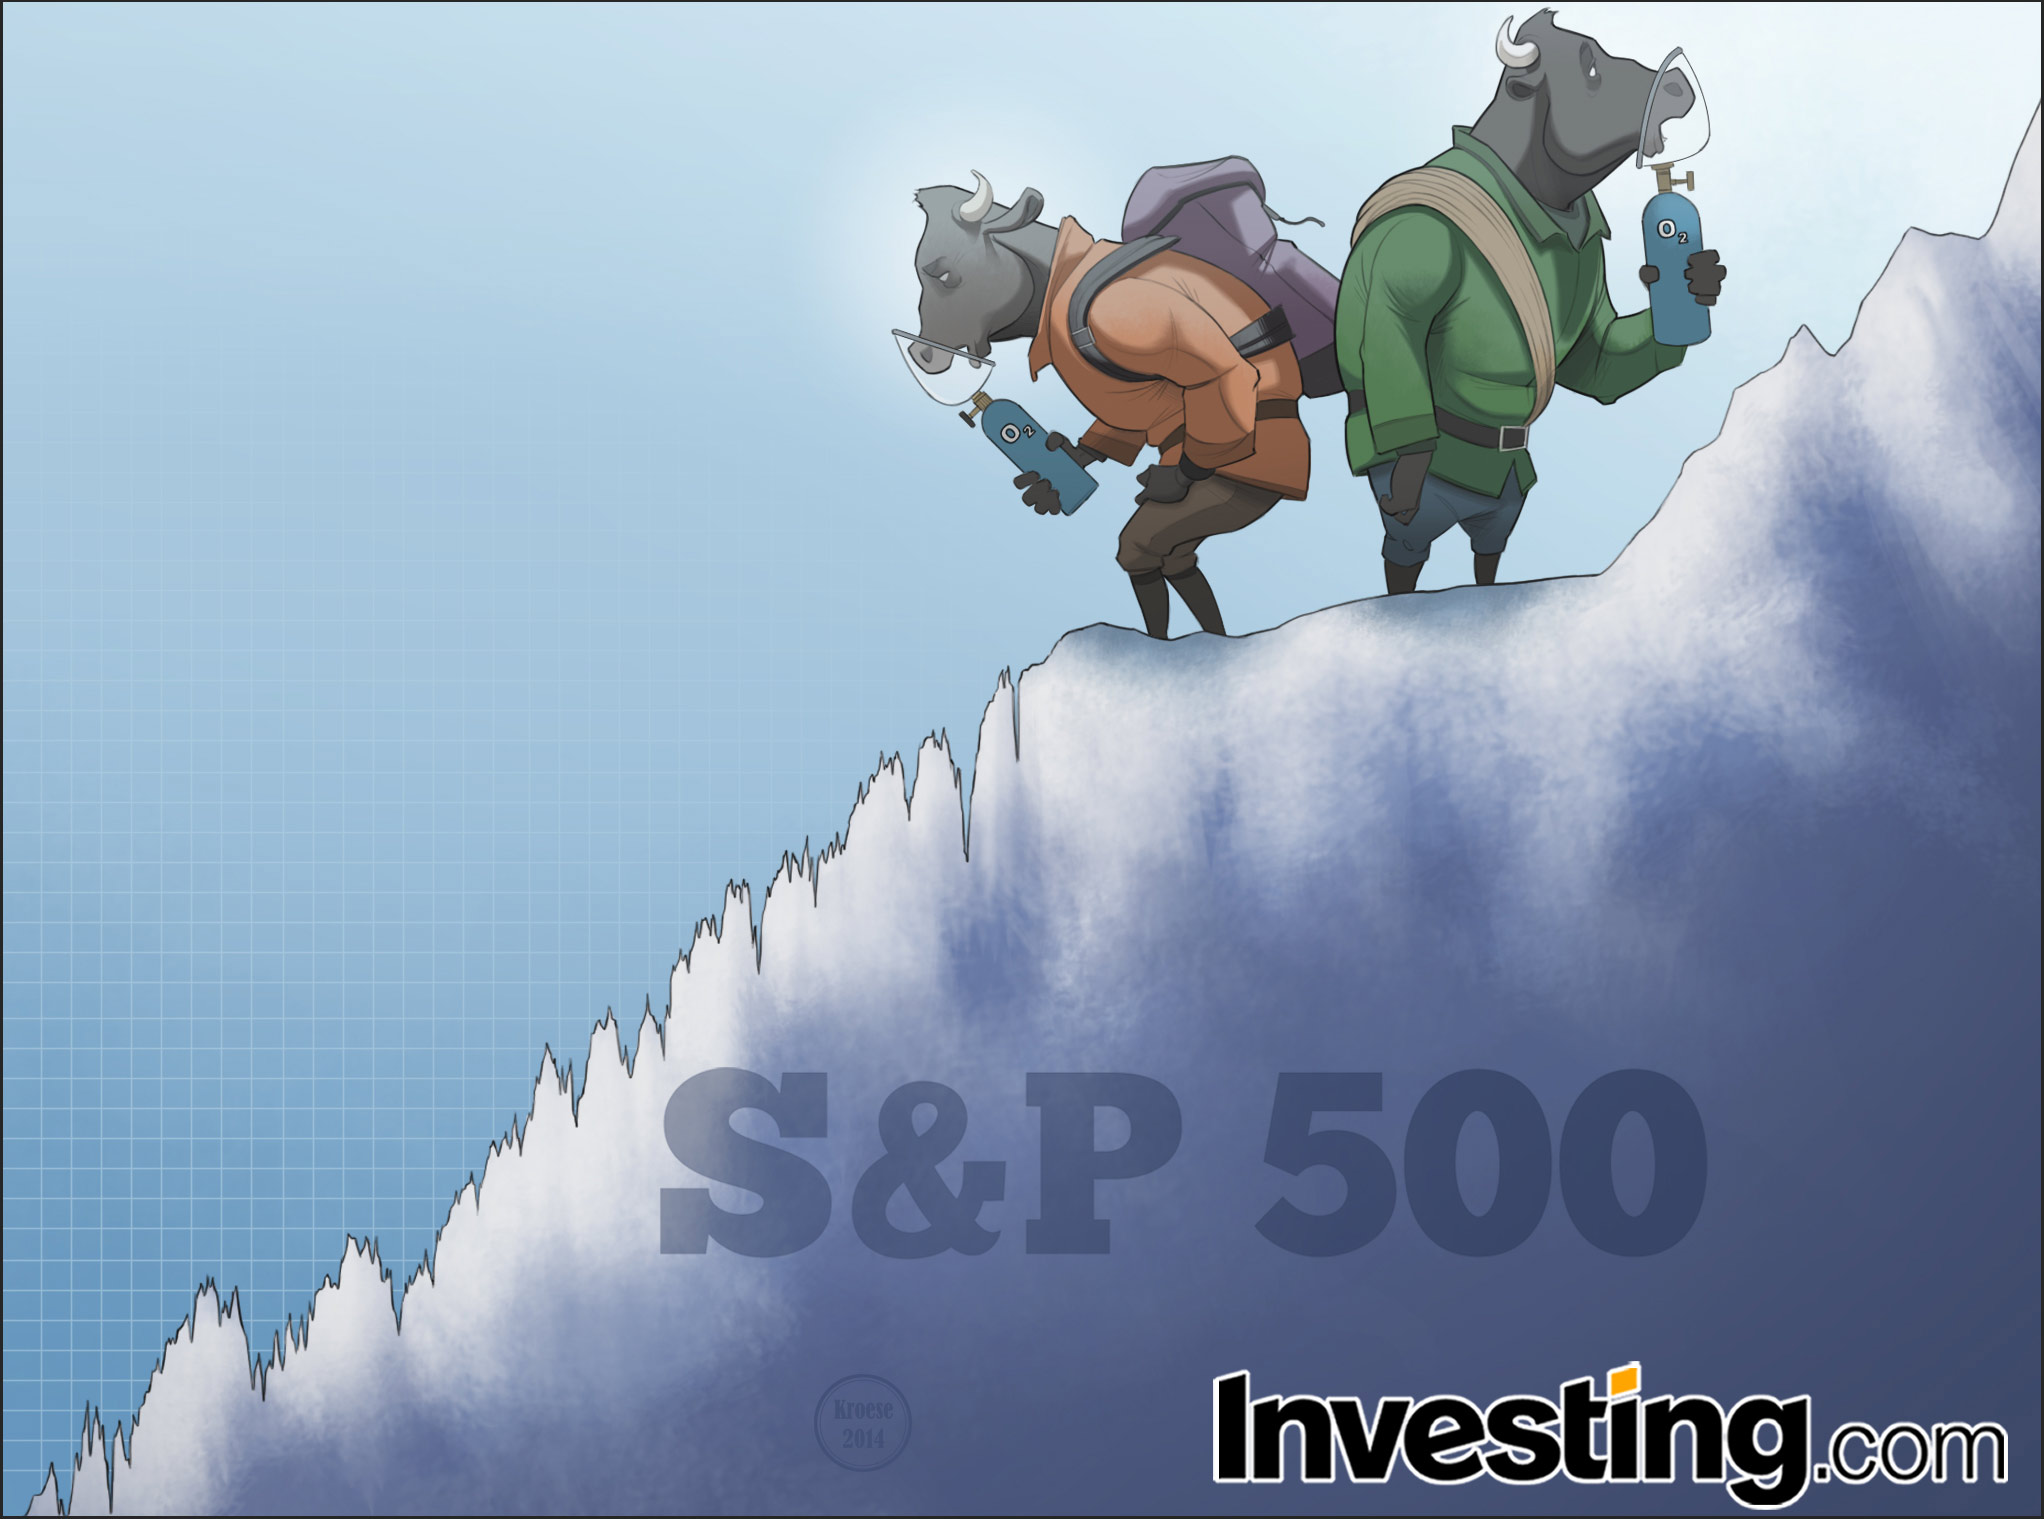 Has the air become too thin for share market bulls to continue their climb in 2015?